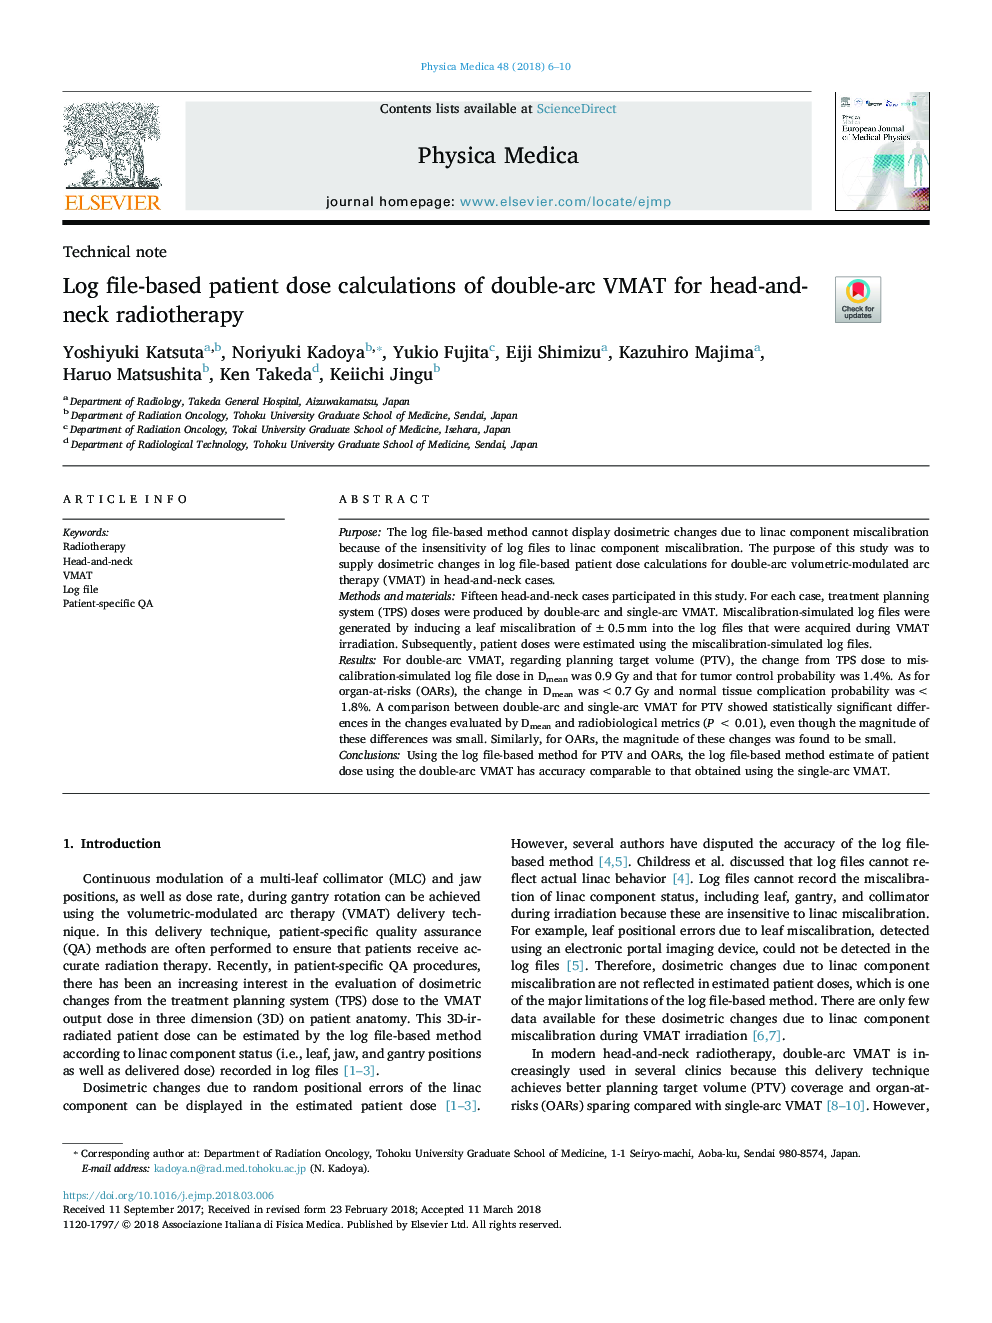 Log file-based patient dose calculations of double-arc VMAT for head-and-neck radiotherapy